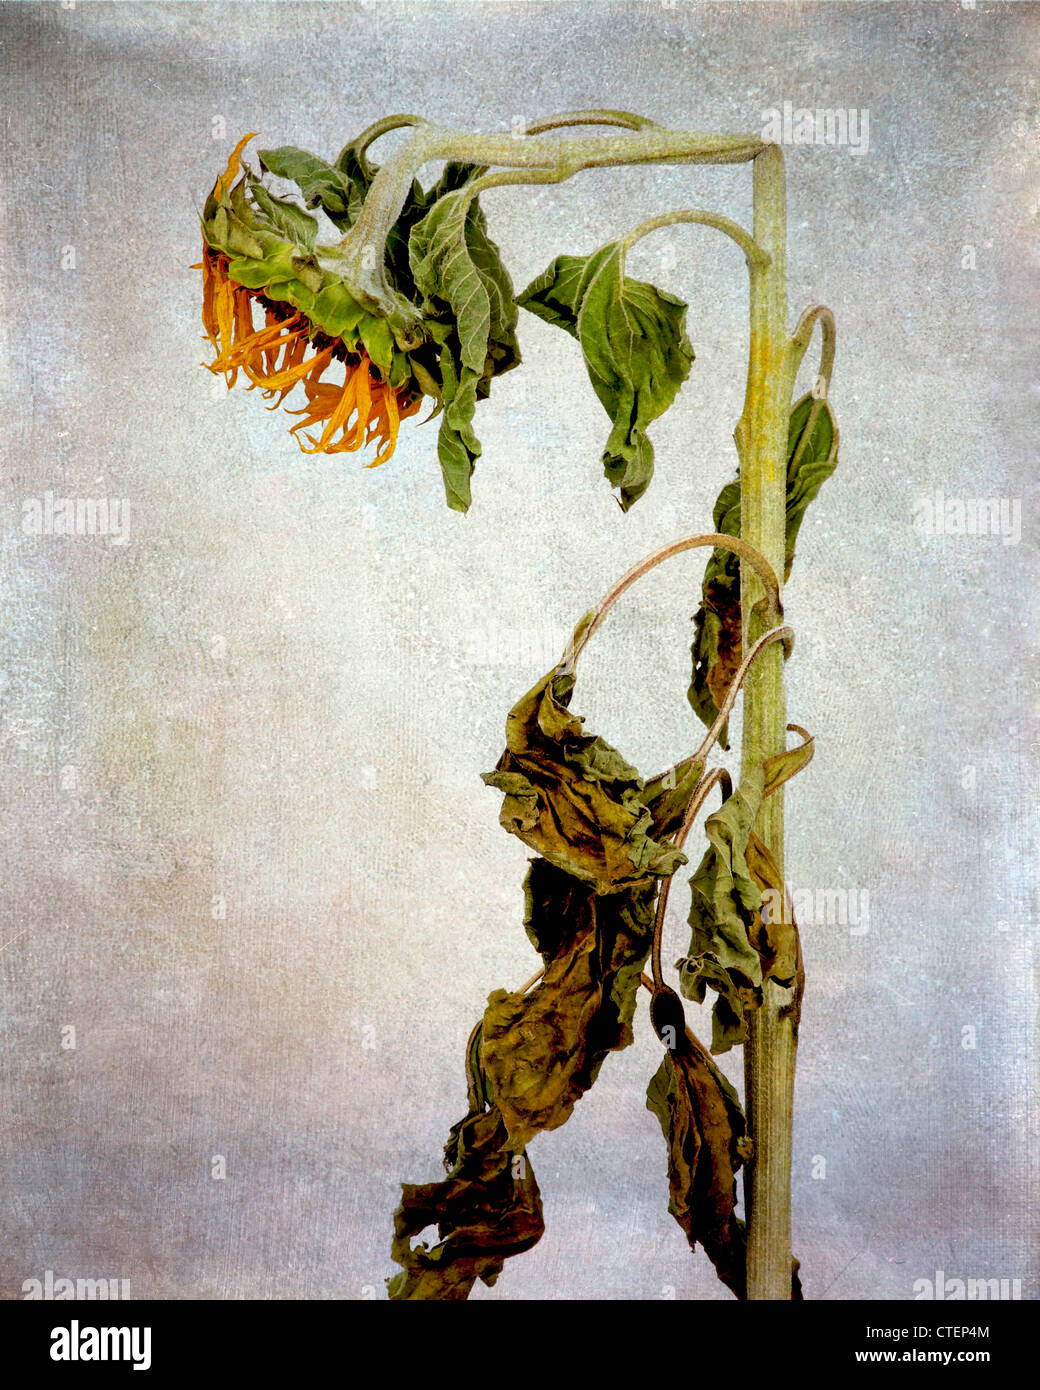 Withered exhausted sunflower, vintage look still life. Stock Photo